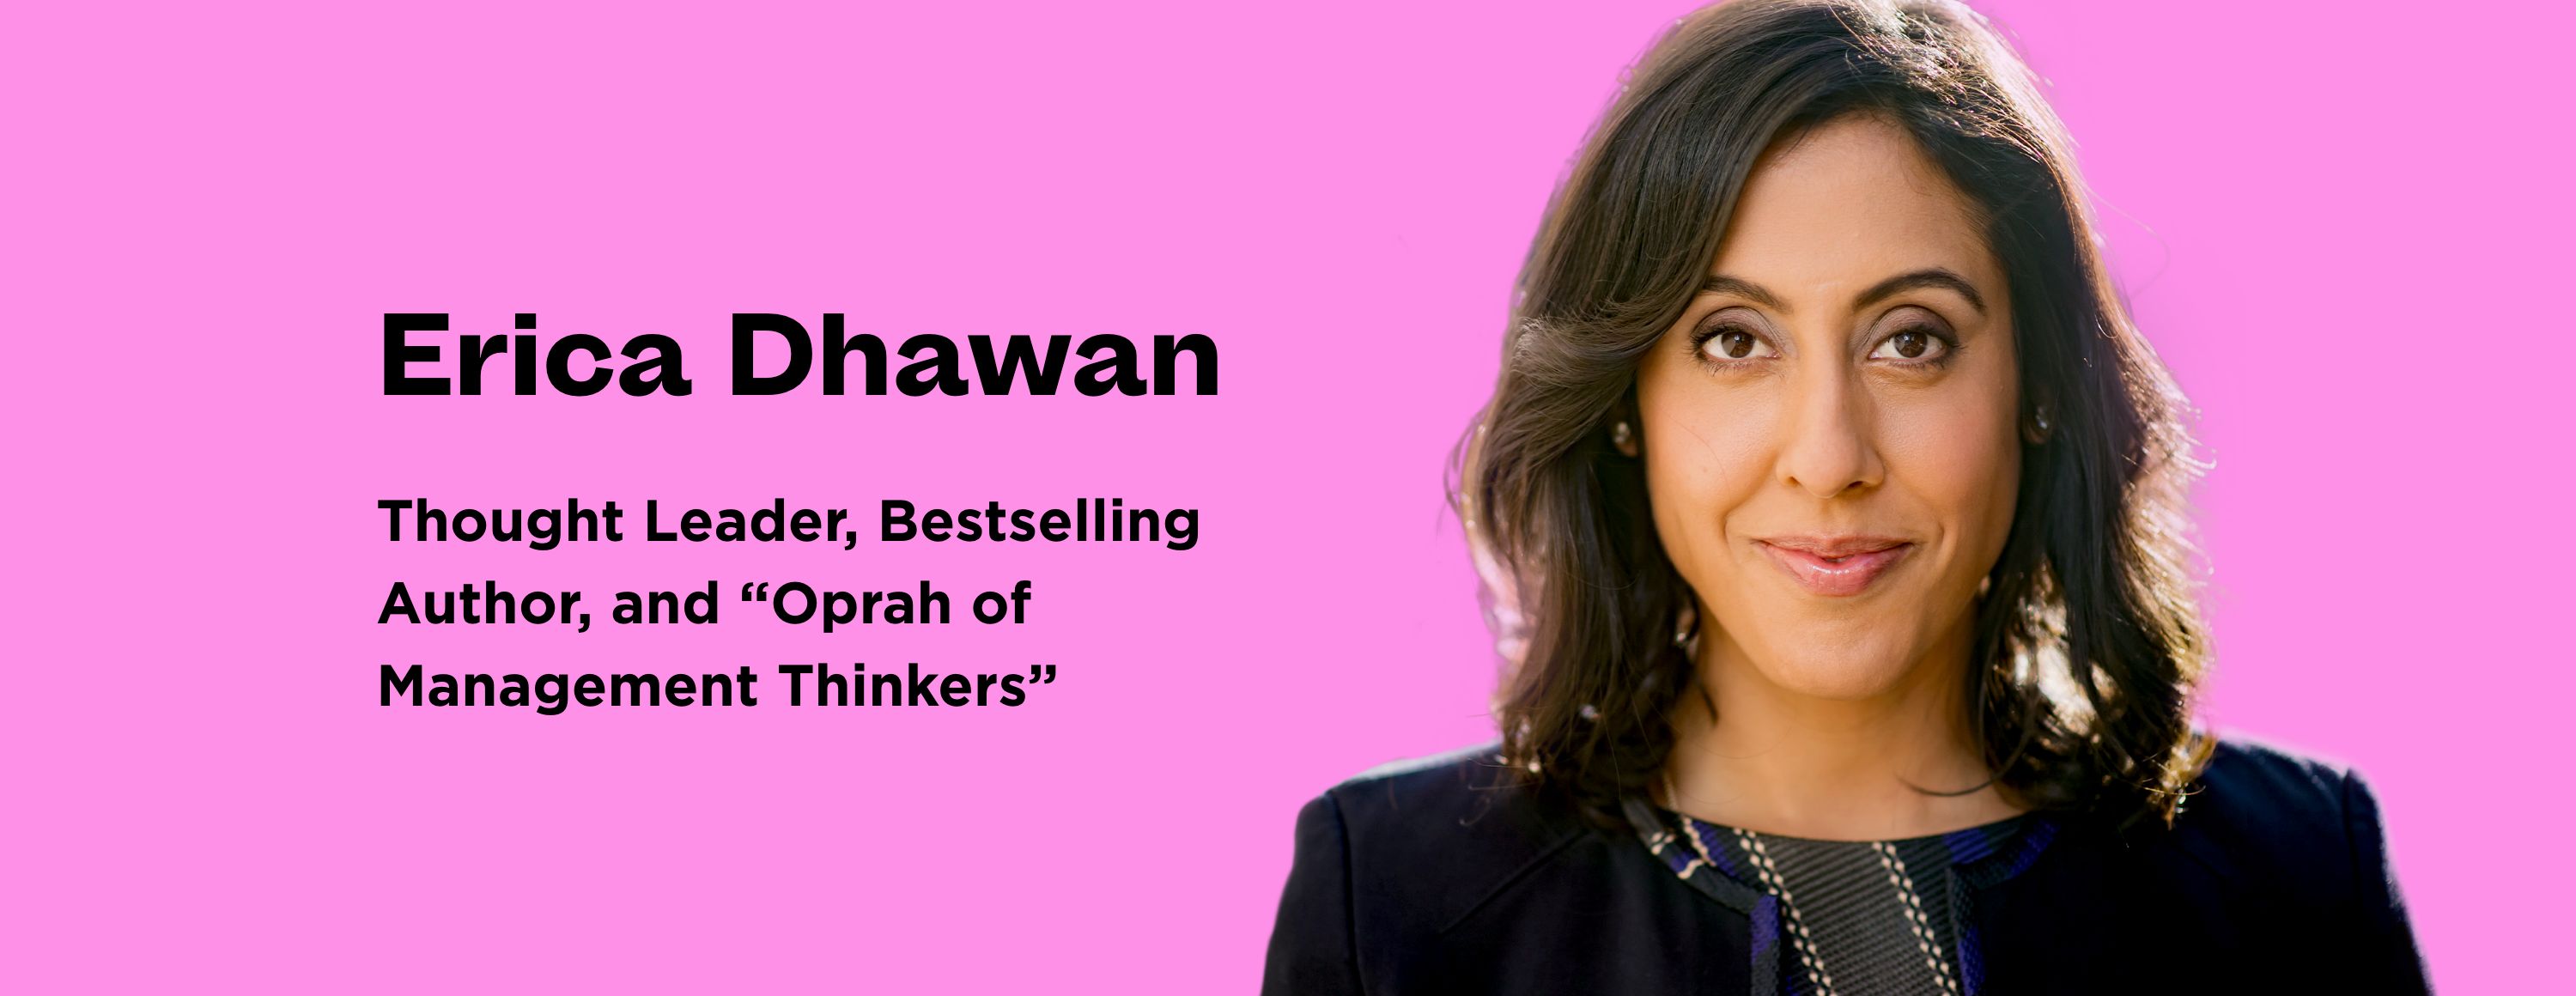 Erica Dhawan: Thought Leader, Bestselling Author and “Oprah of Management Thinkers”